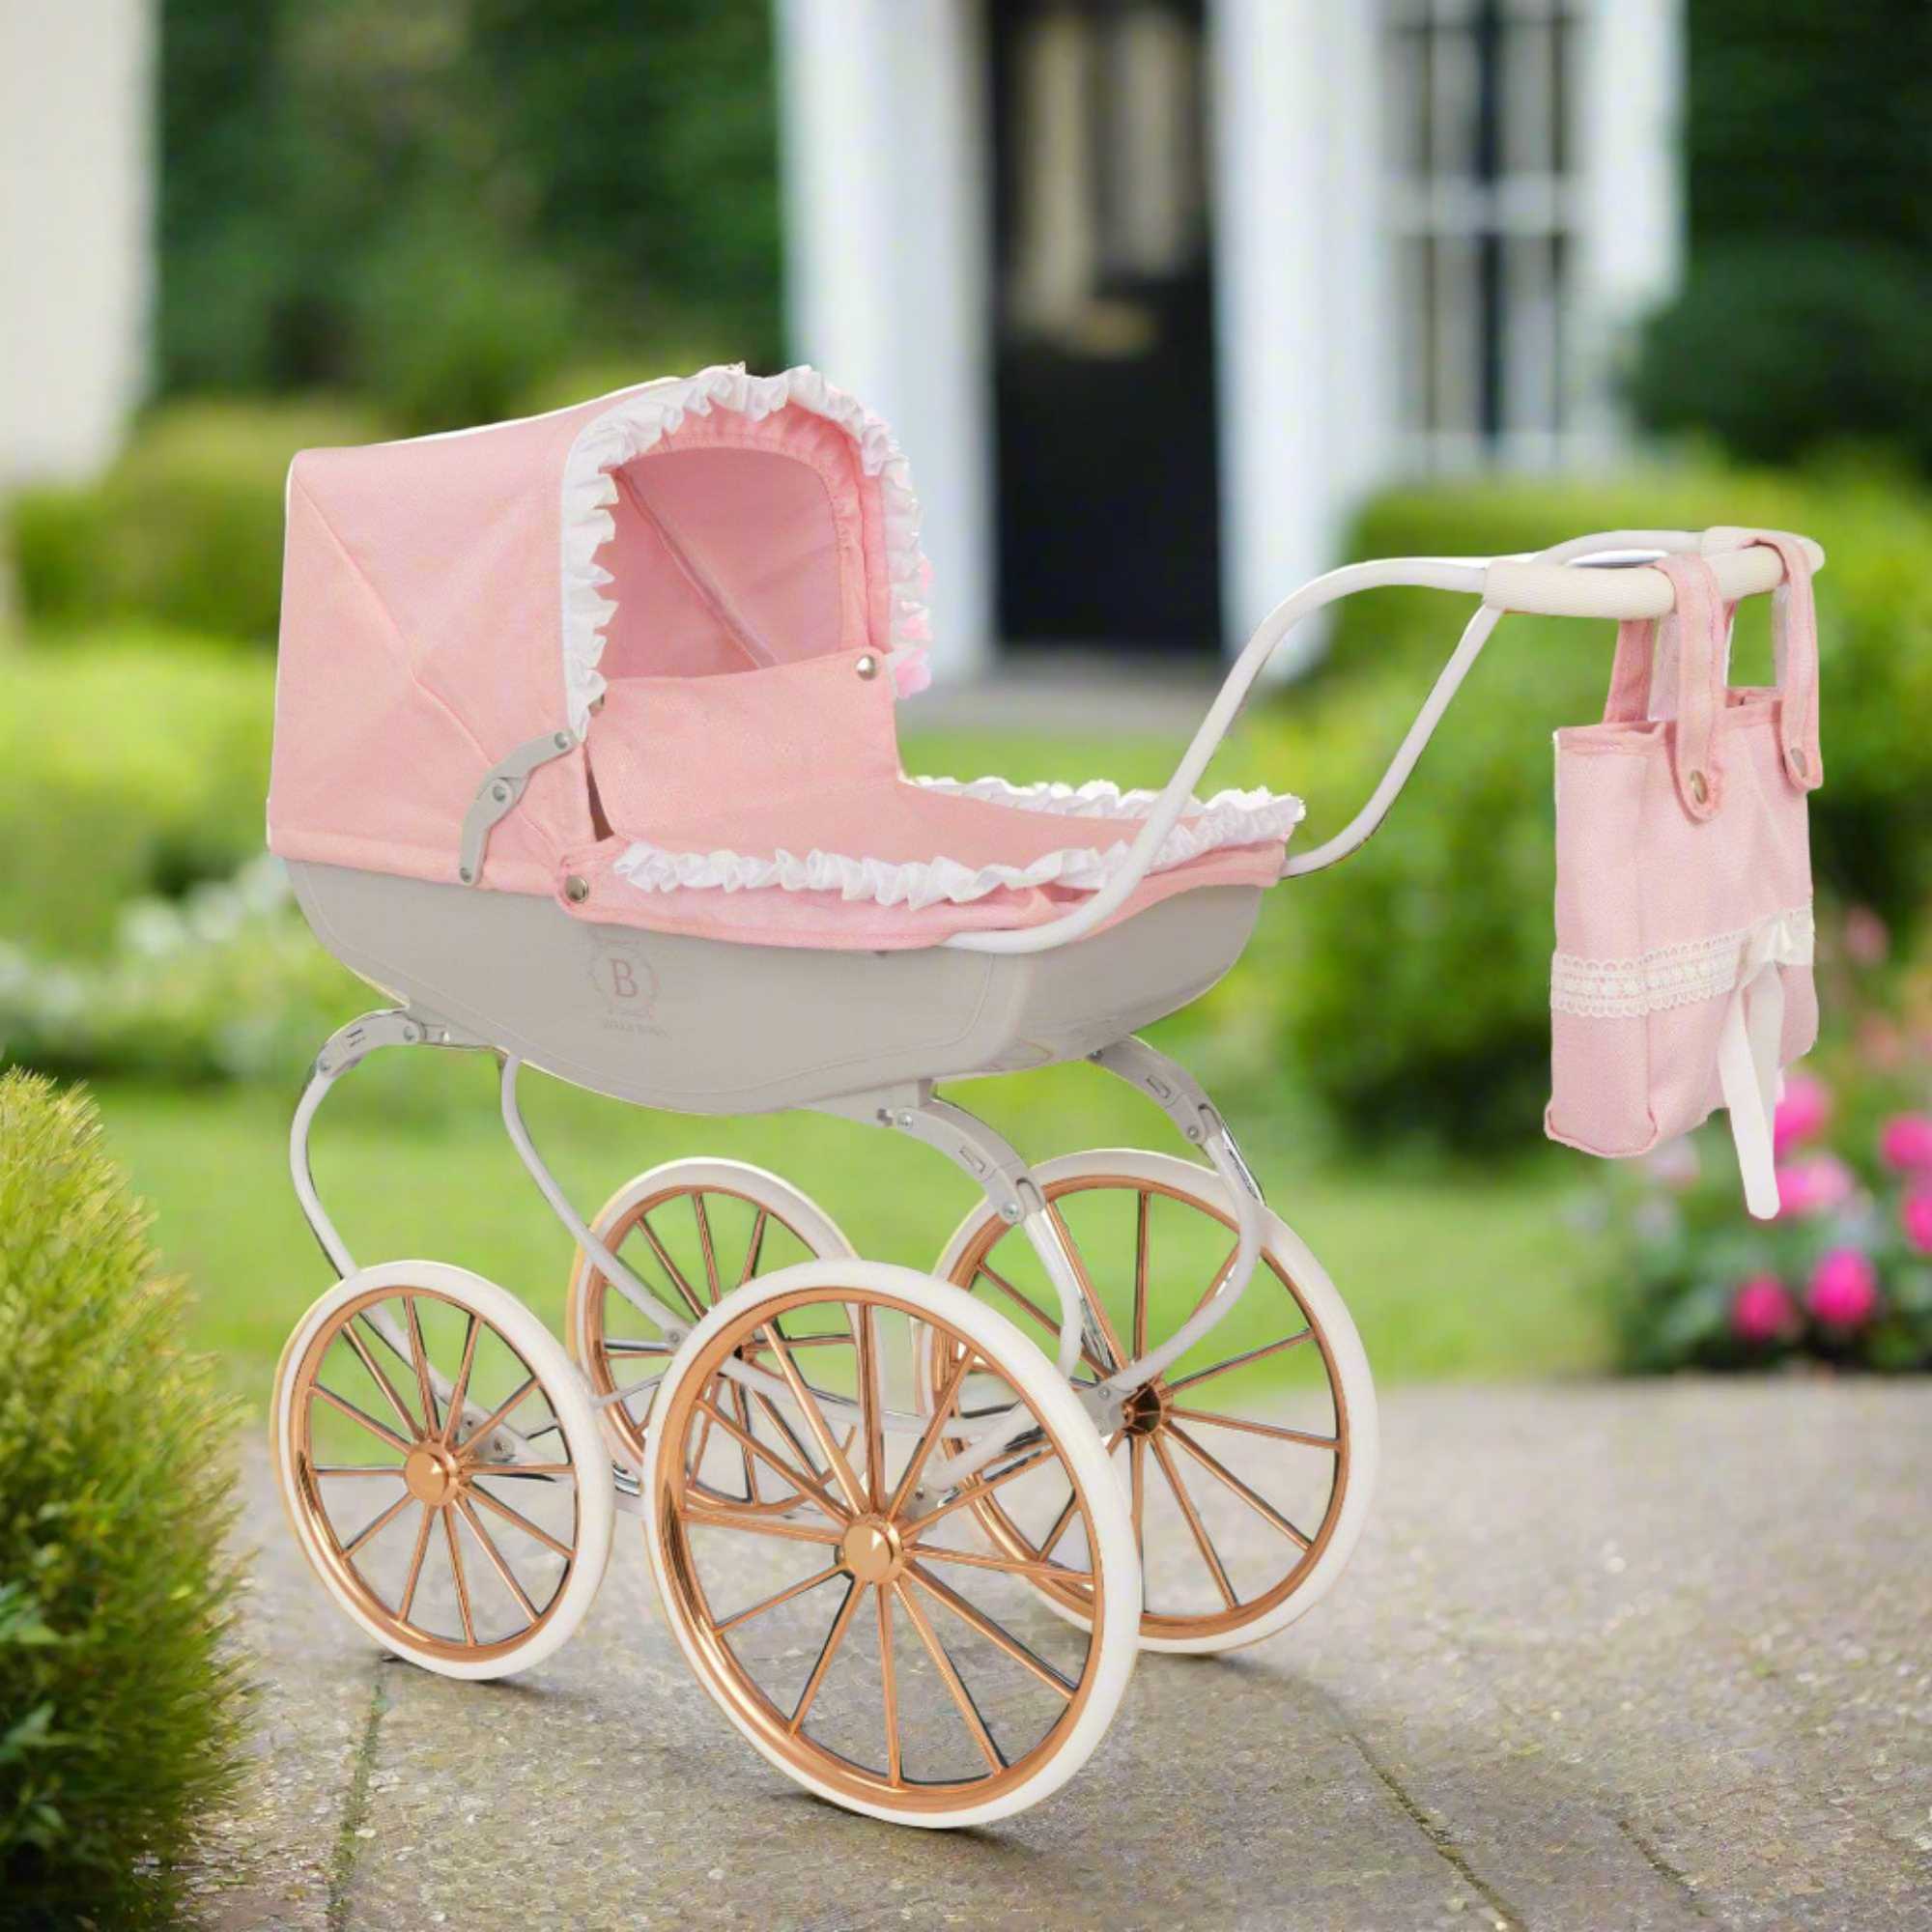 Bella Rosa Cambridge Carriage Dolls Pram - Pink & Rose Gold - Luxurious pink and rose gold pram designed for dolls, offering a stylish and elegant accessory for imaginative play